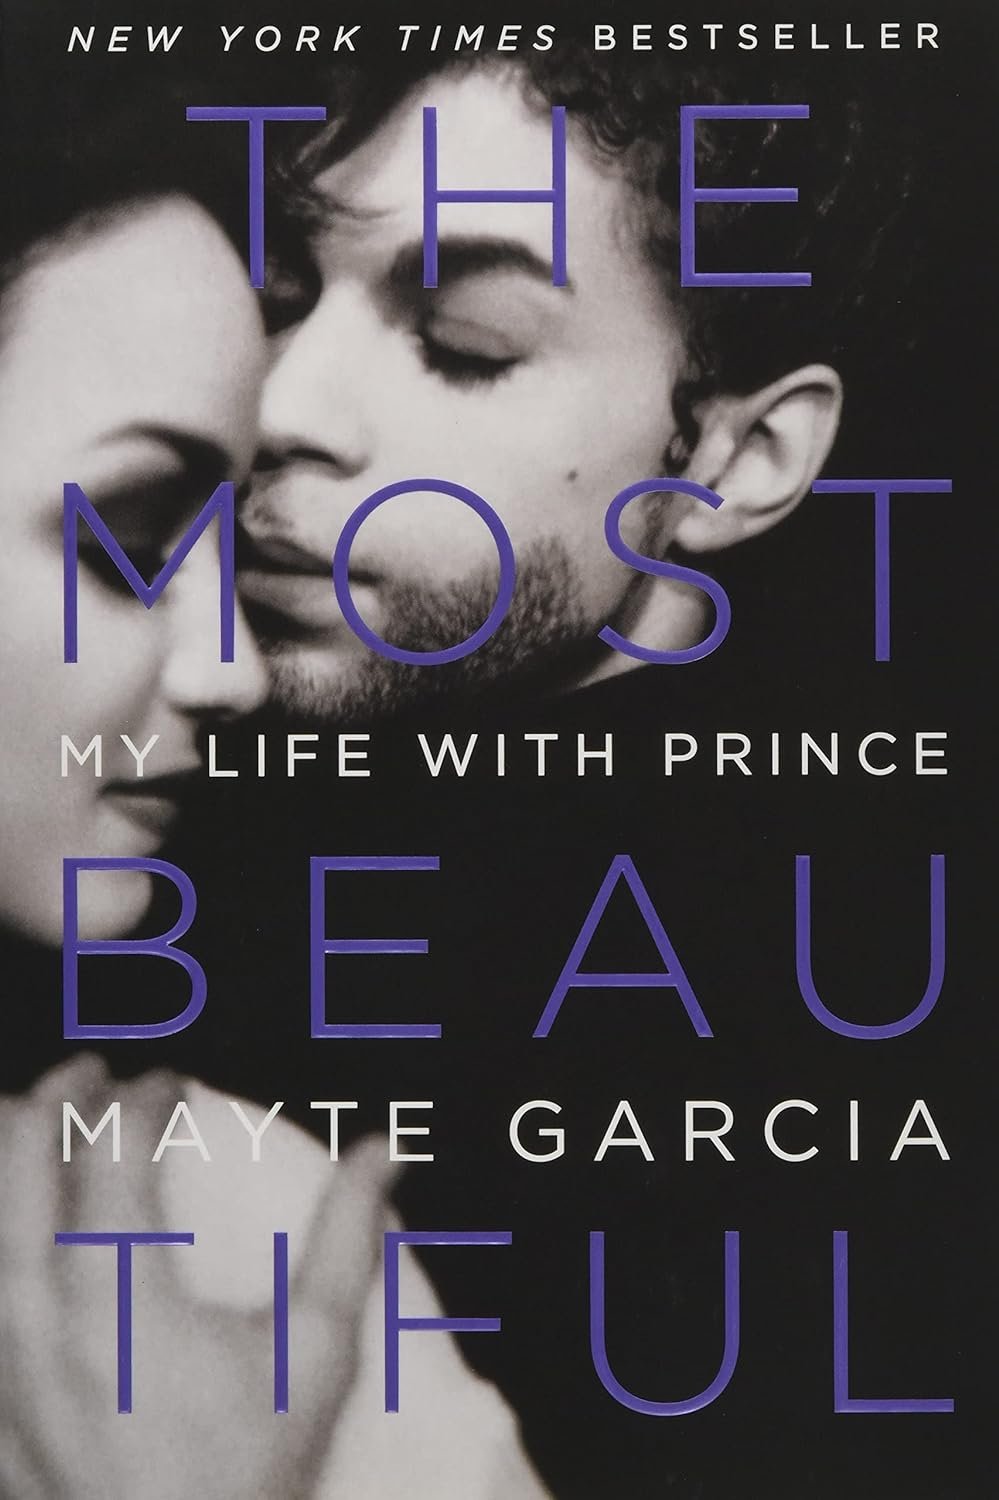 The Most Beautiful: My Life with Prince